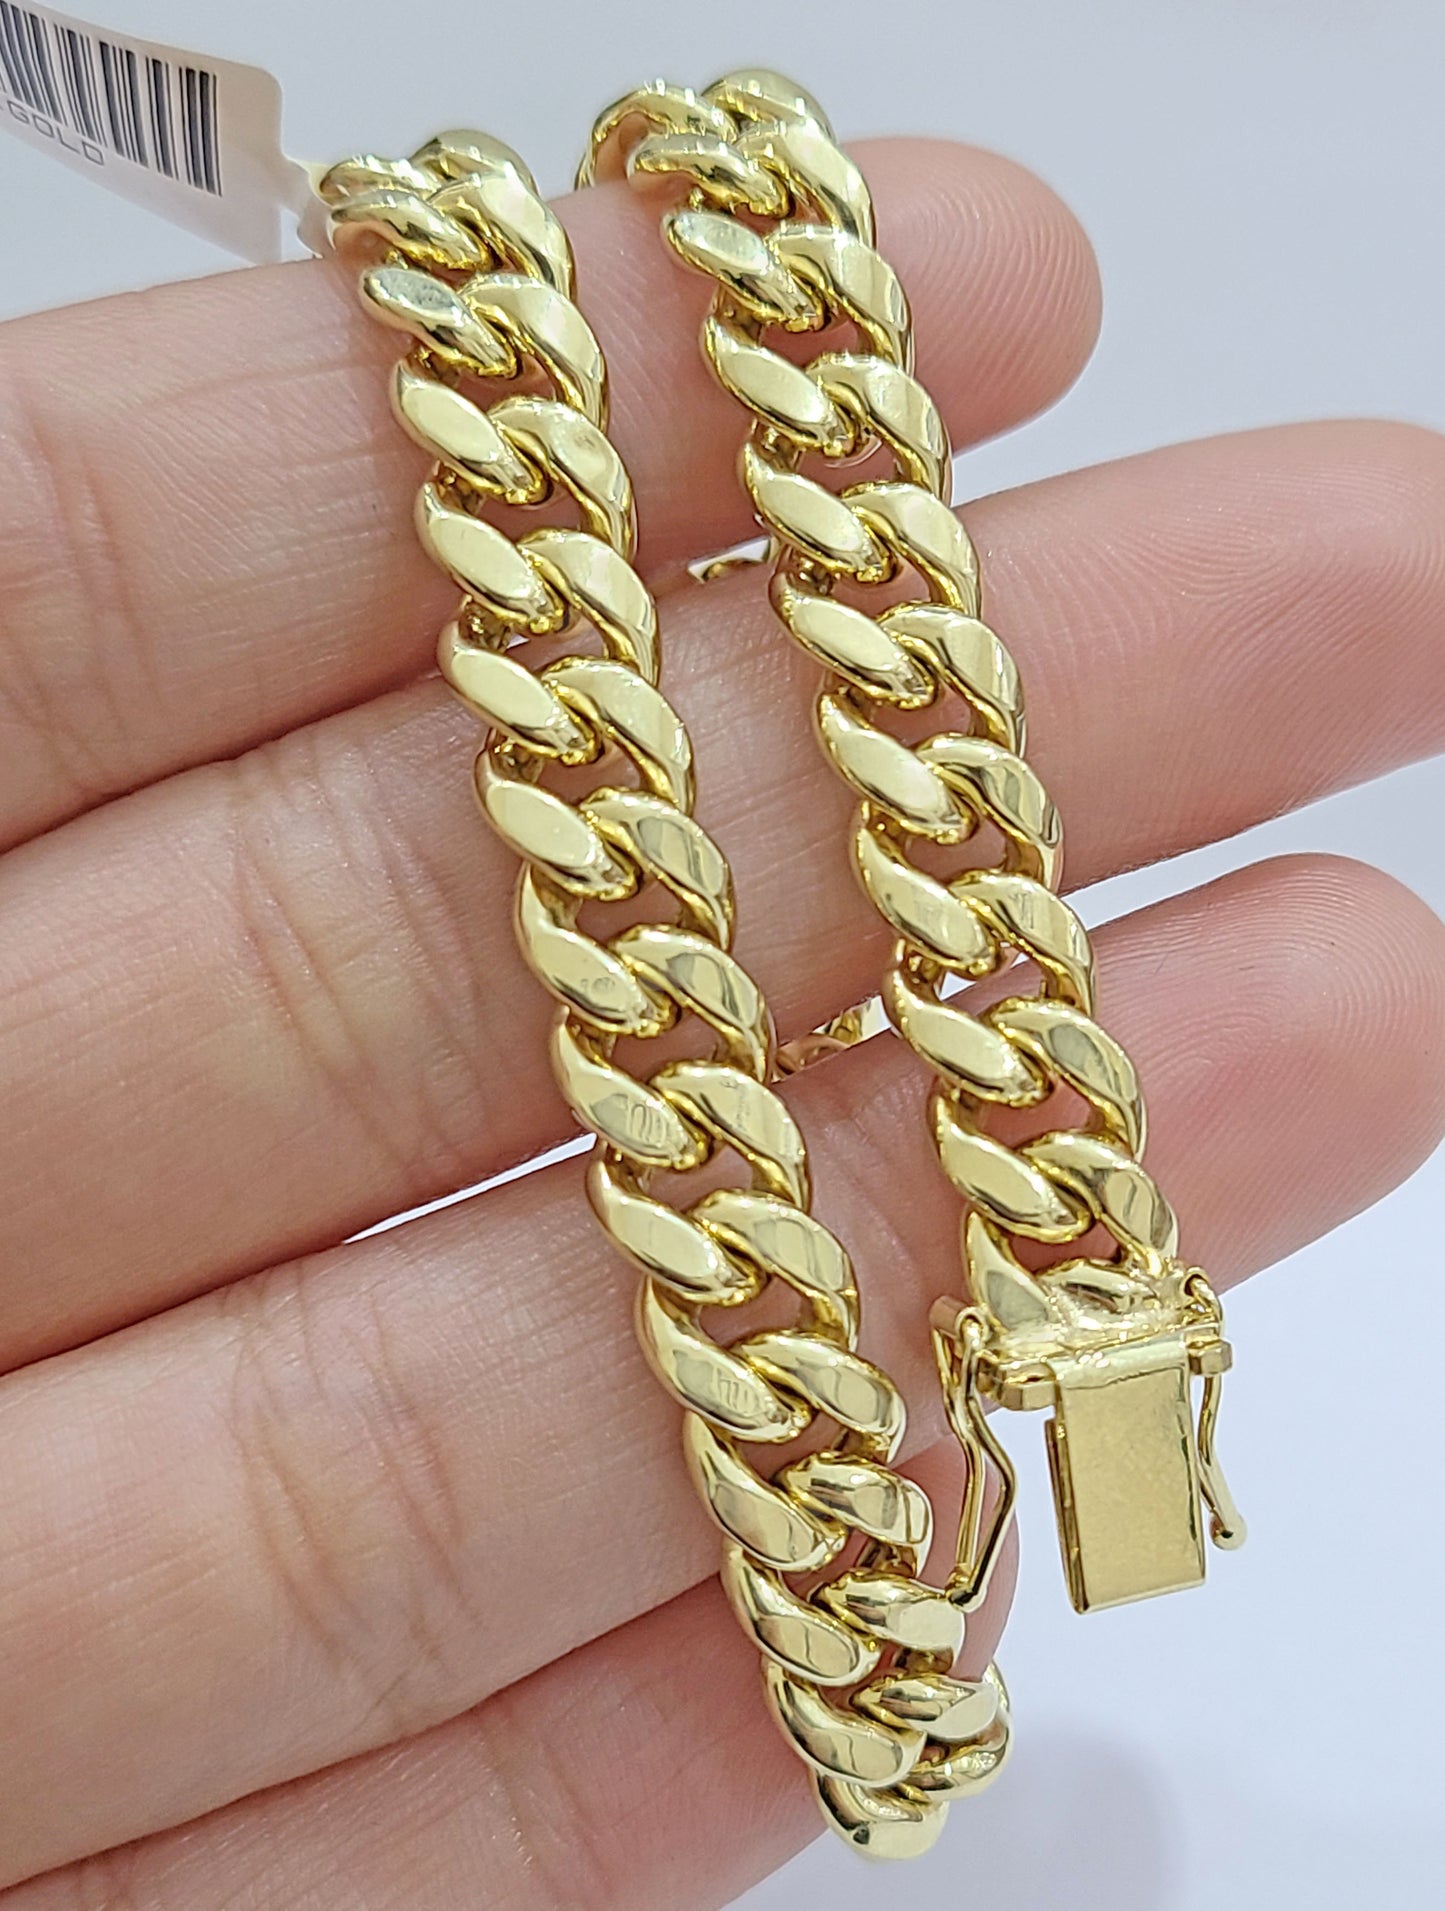 Real 10k Yellow Gold Miami Cuban Link Bracelet 7" inch 8mm 10kt Kids and Ladies